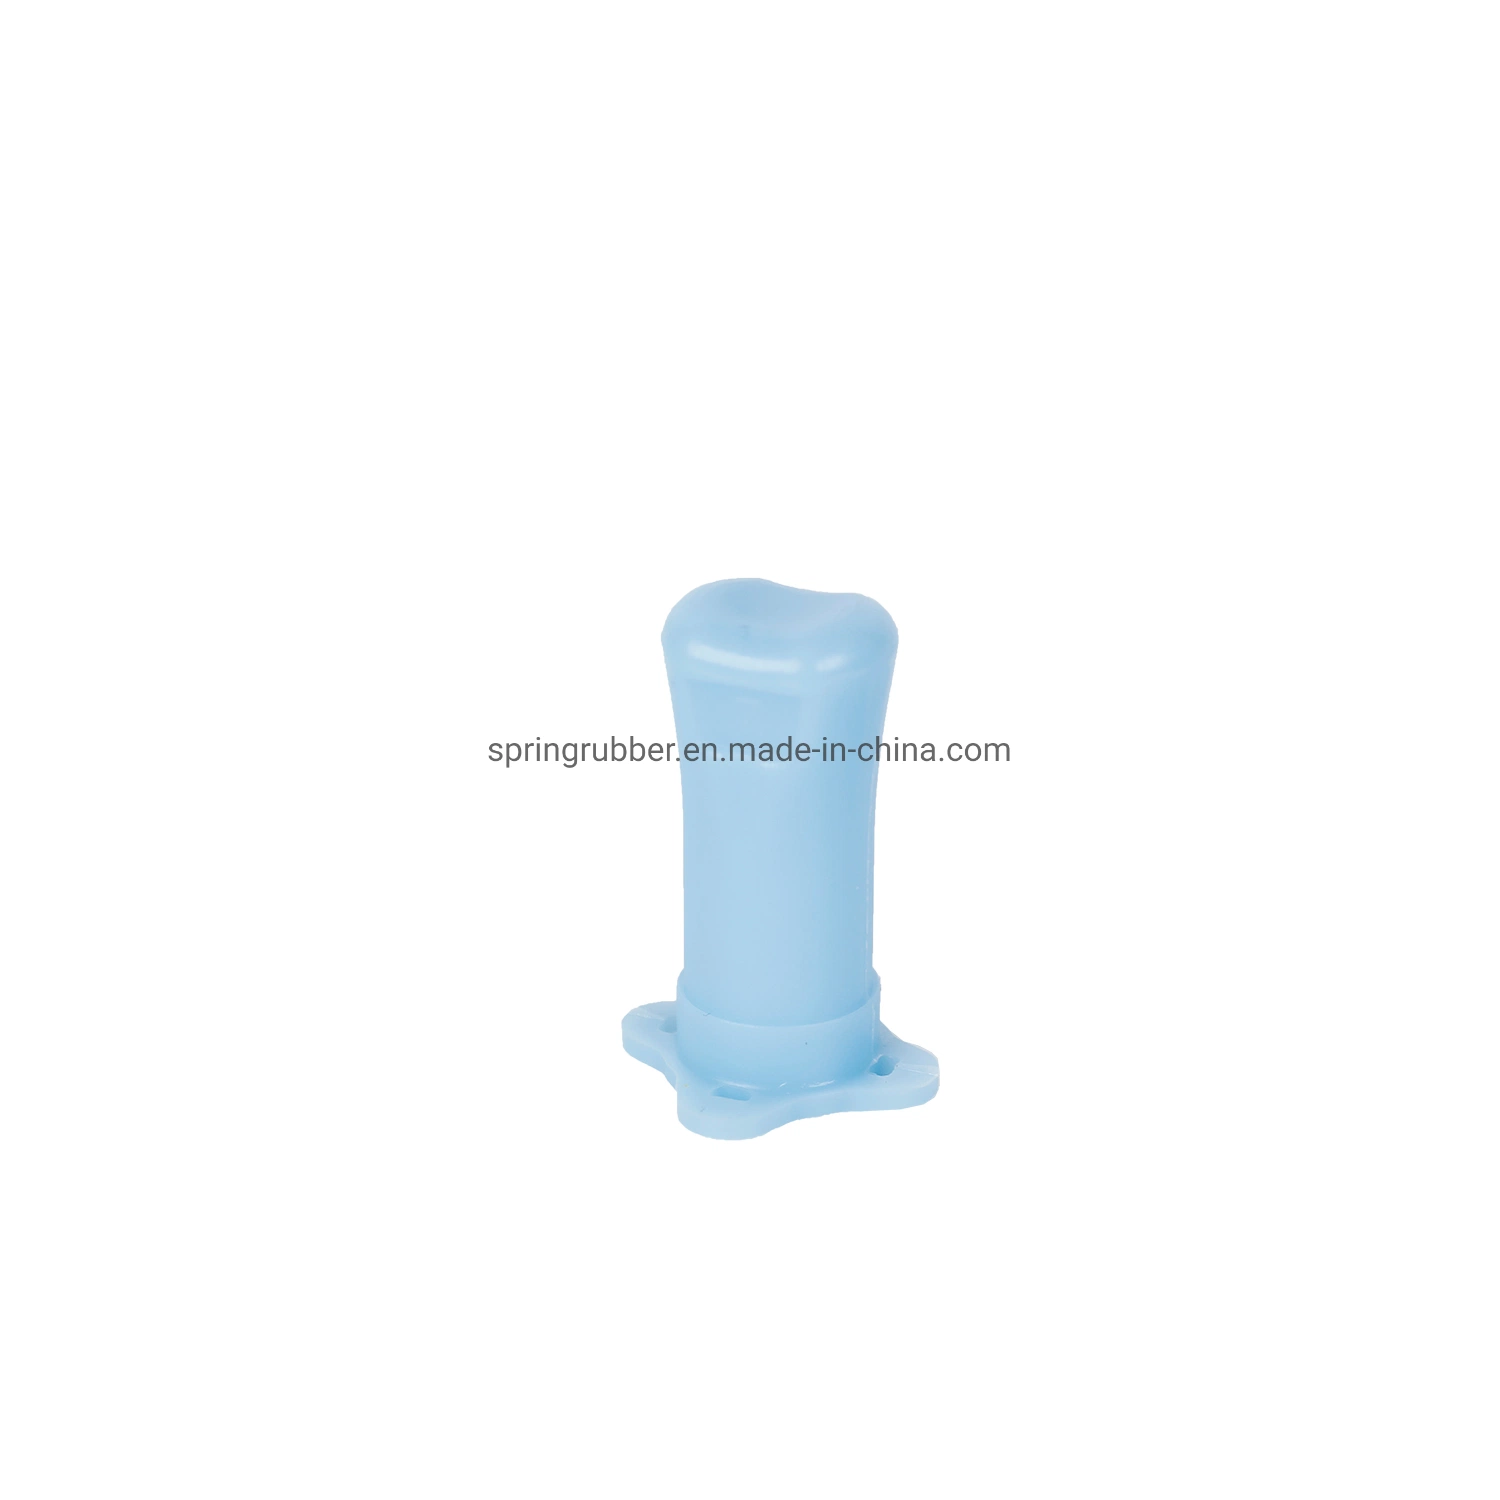 Customized Rubber Stoppers with Special Shapes of Various Materials